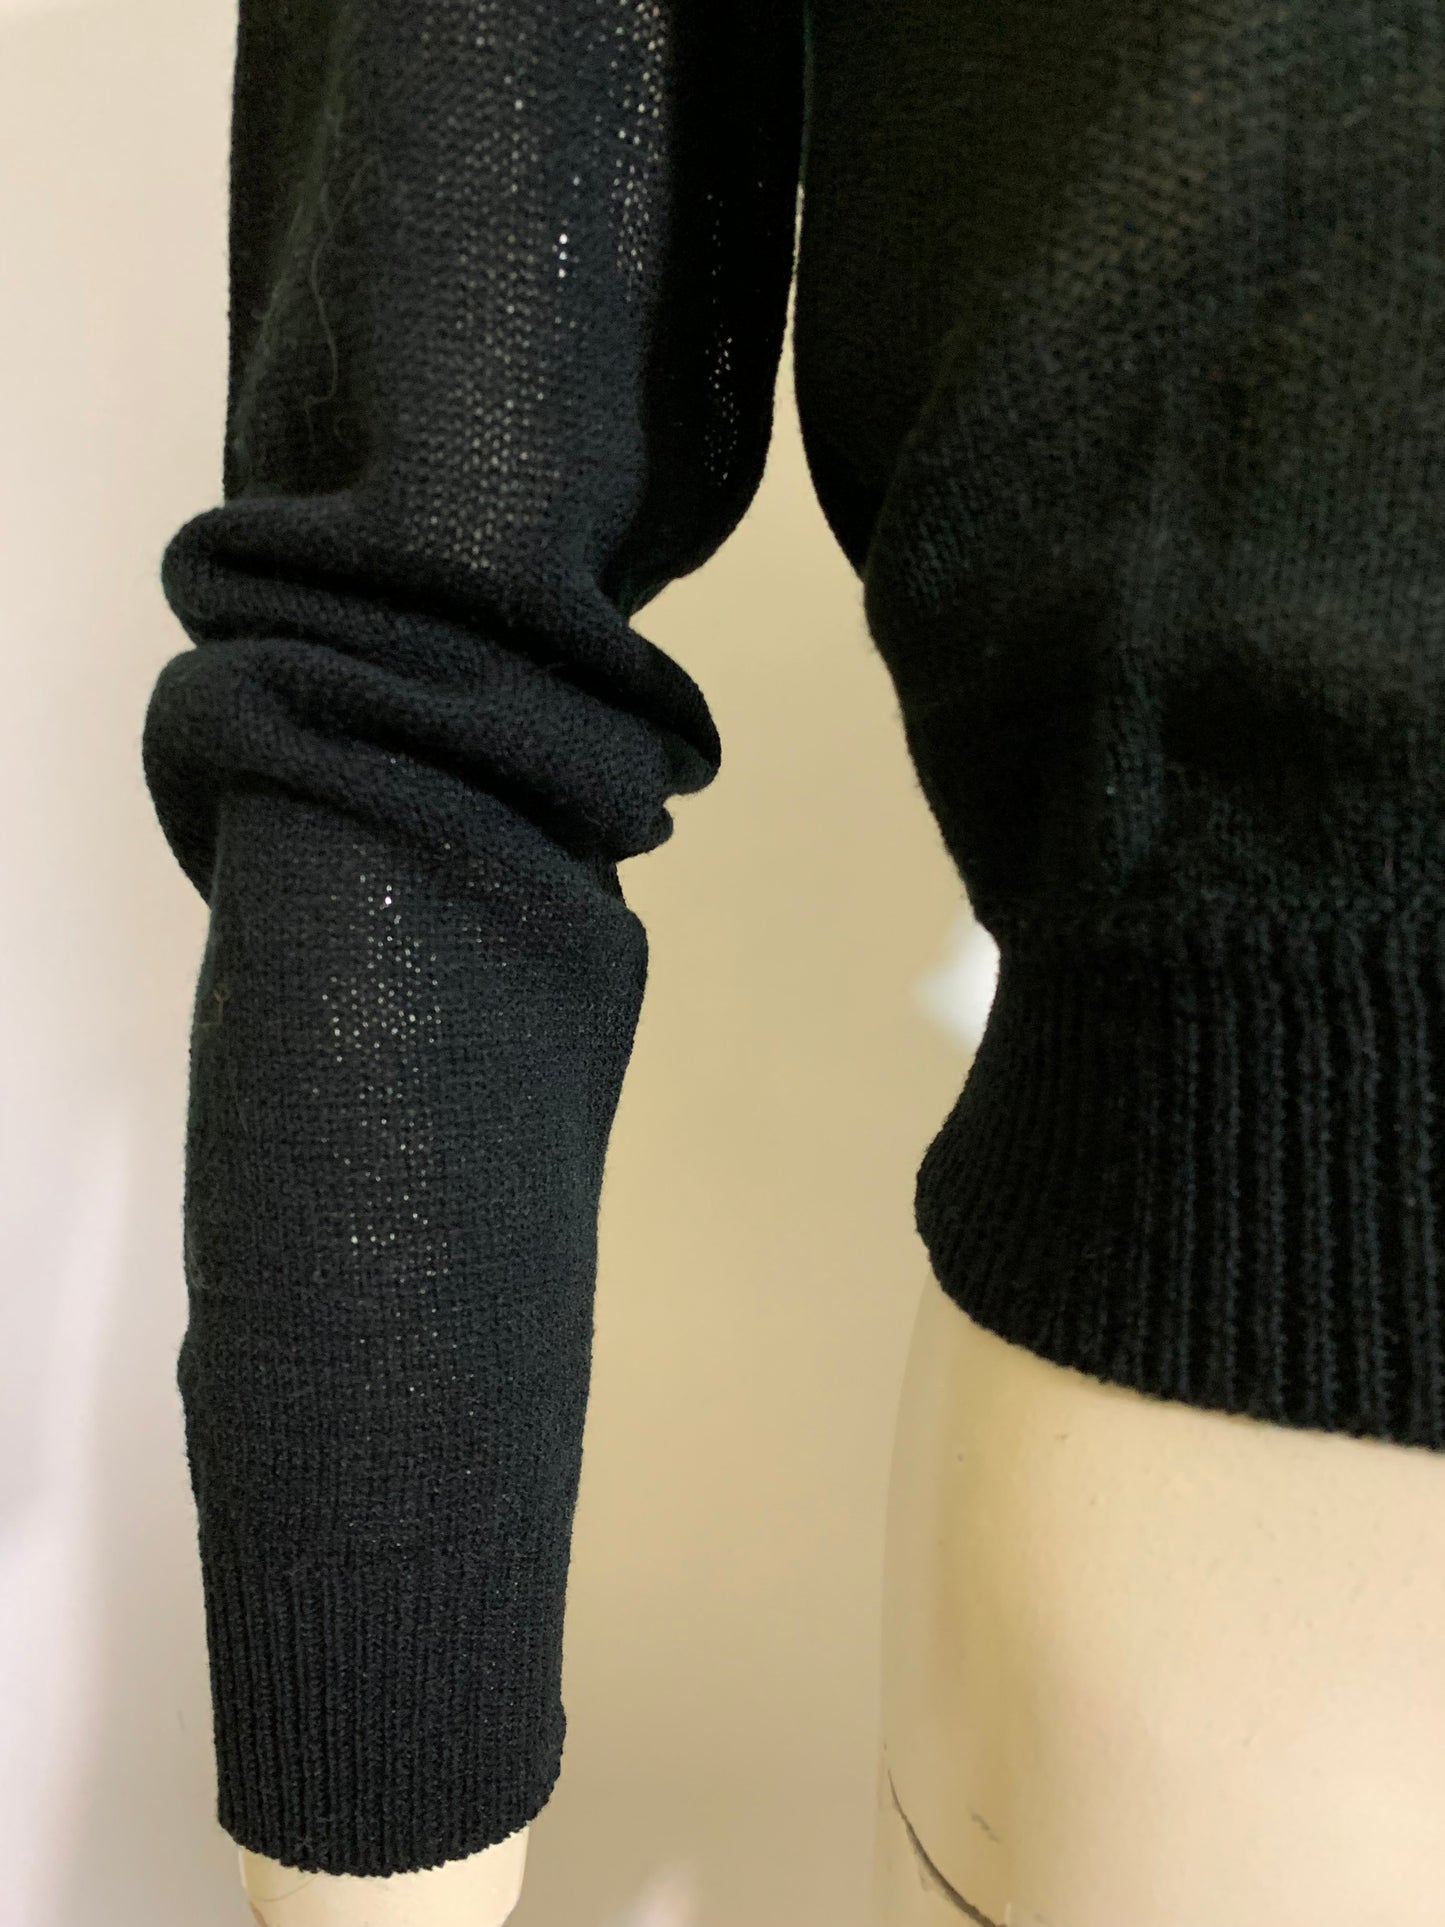 Slinky Black Long Sleeved Rayon Sweater with Metallic Disco Accents circa 1970s